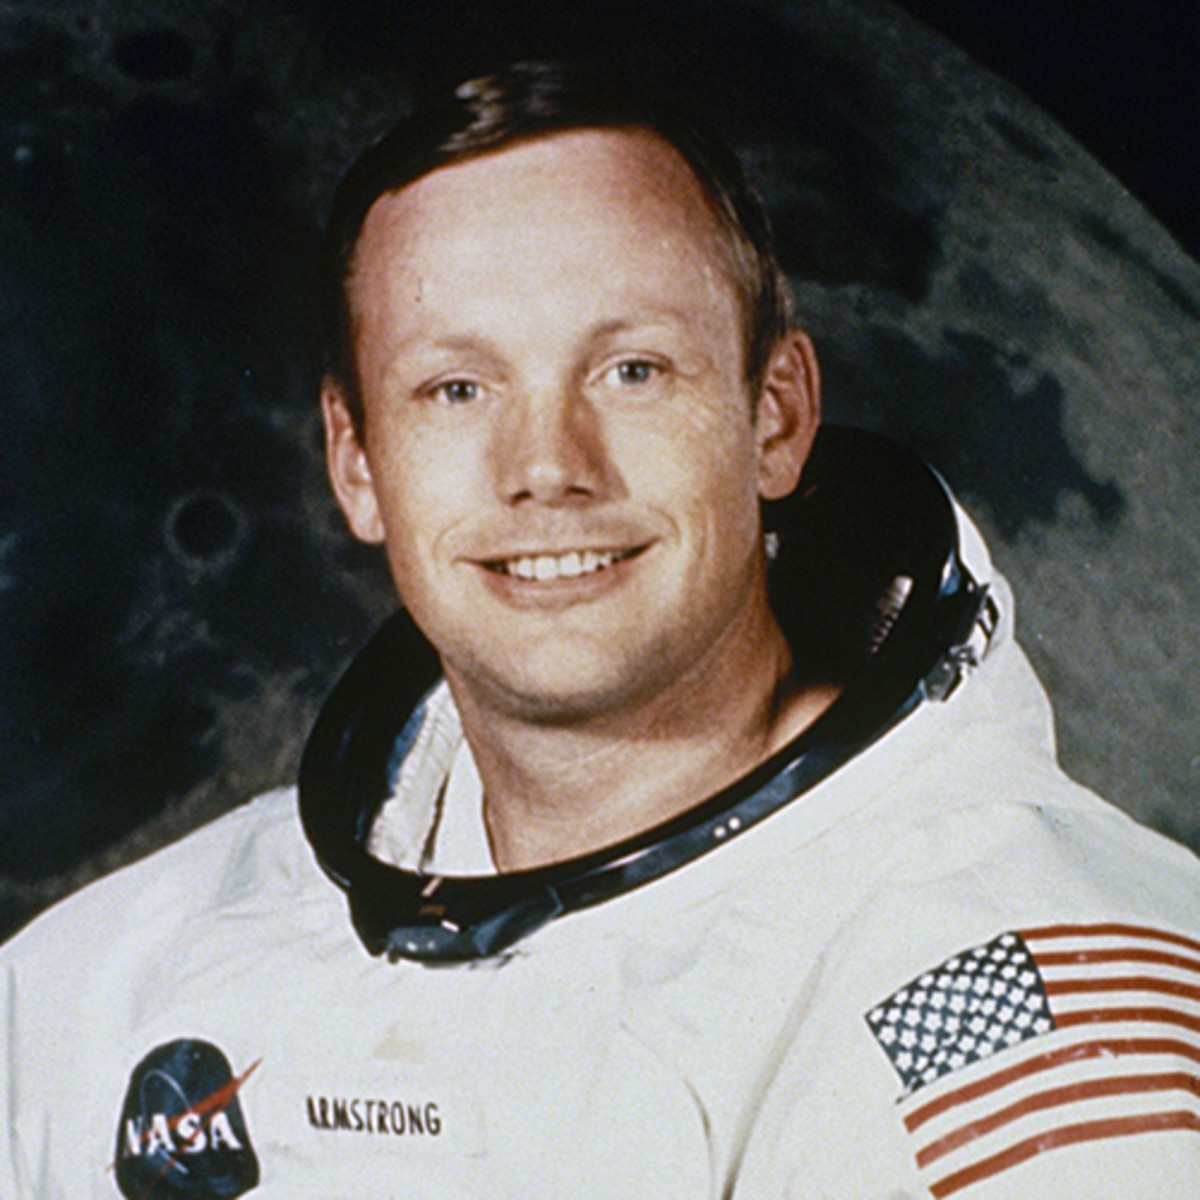 Neil Armstrong official NASA portrait wearing a spacesuit